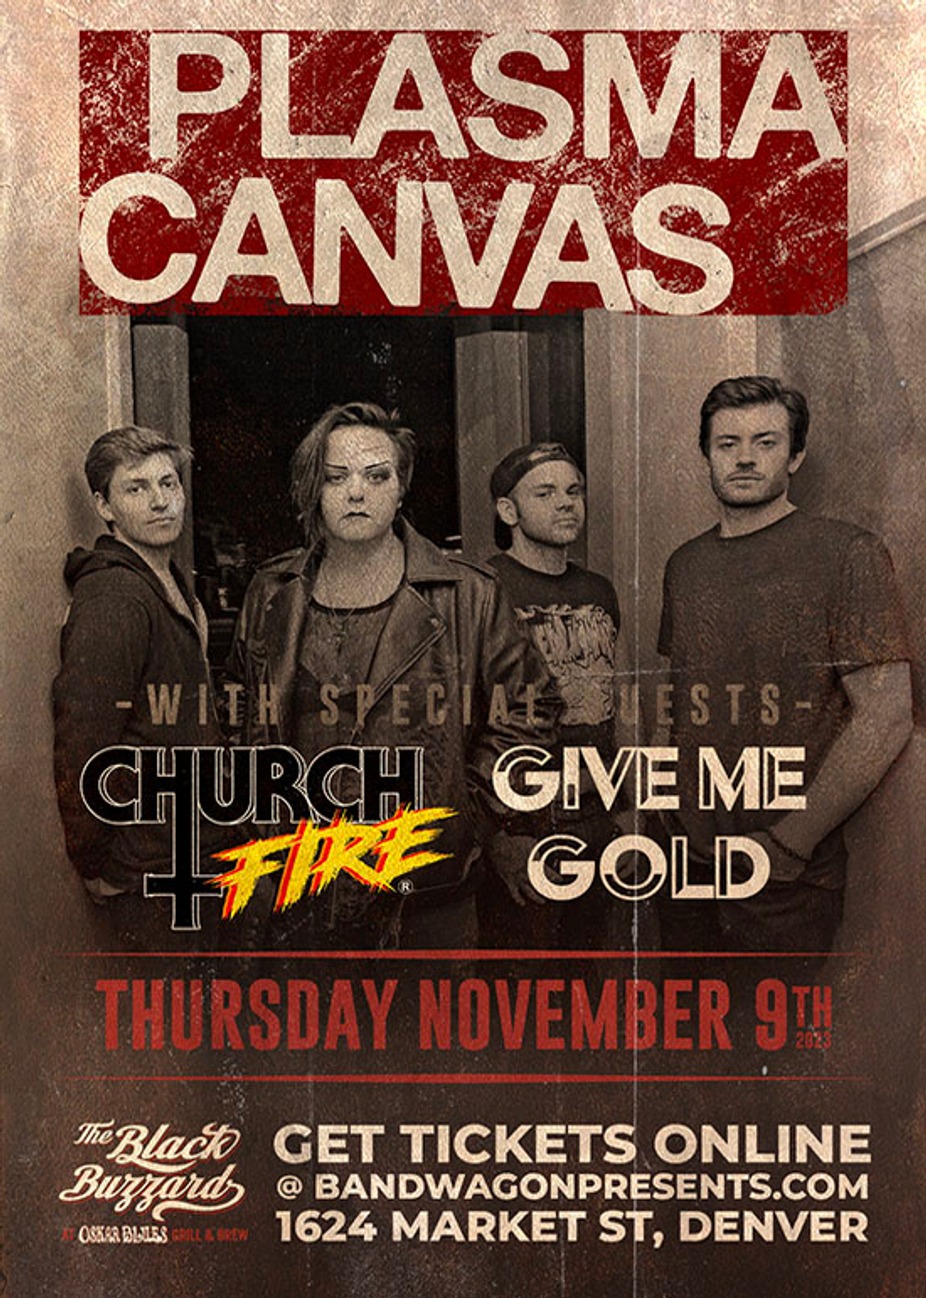 Plasma Canvas with Church Fire + Give Me Gold event photo